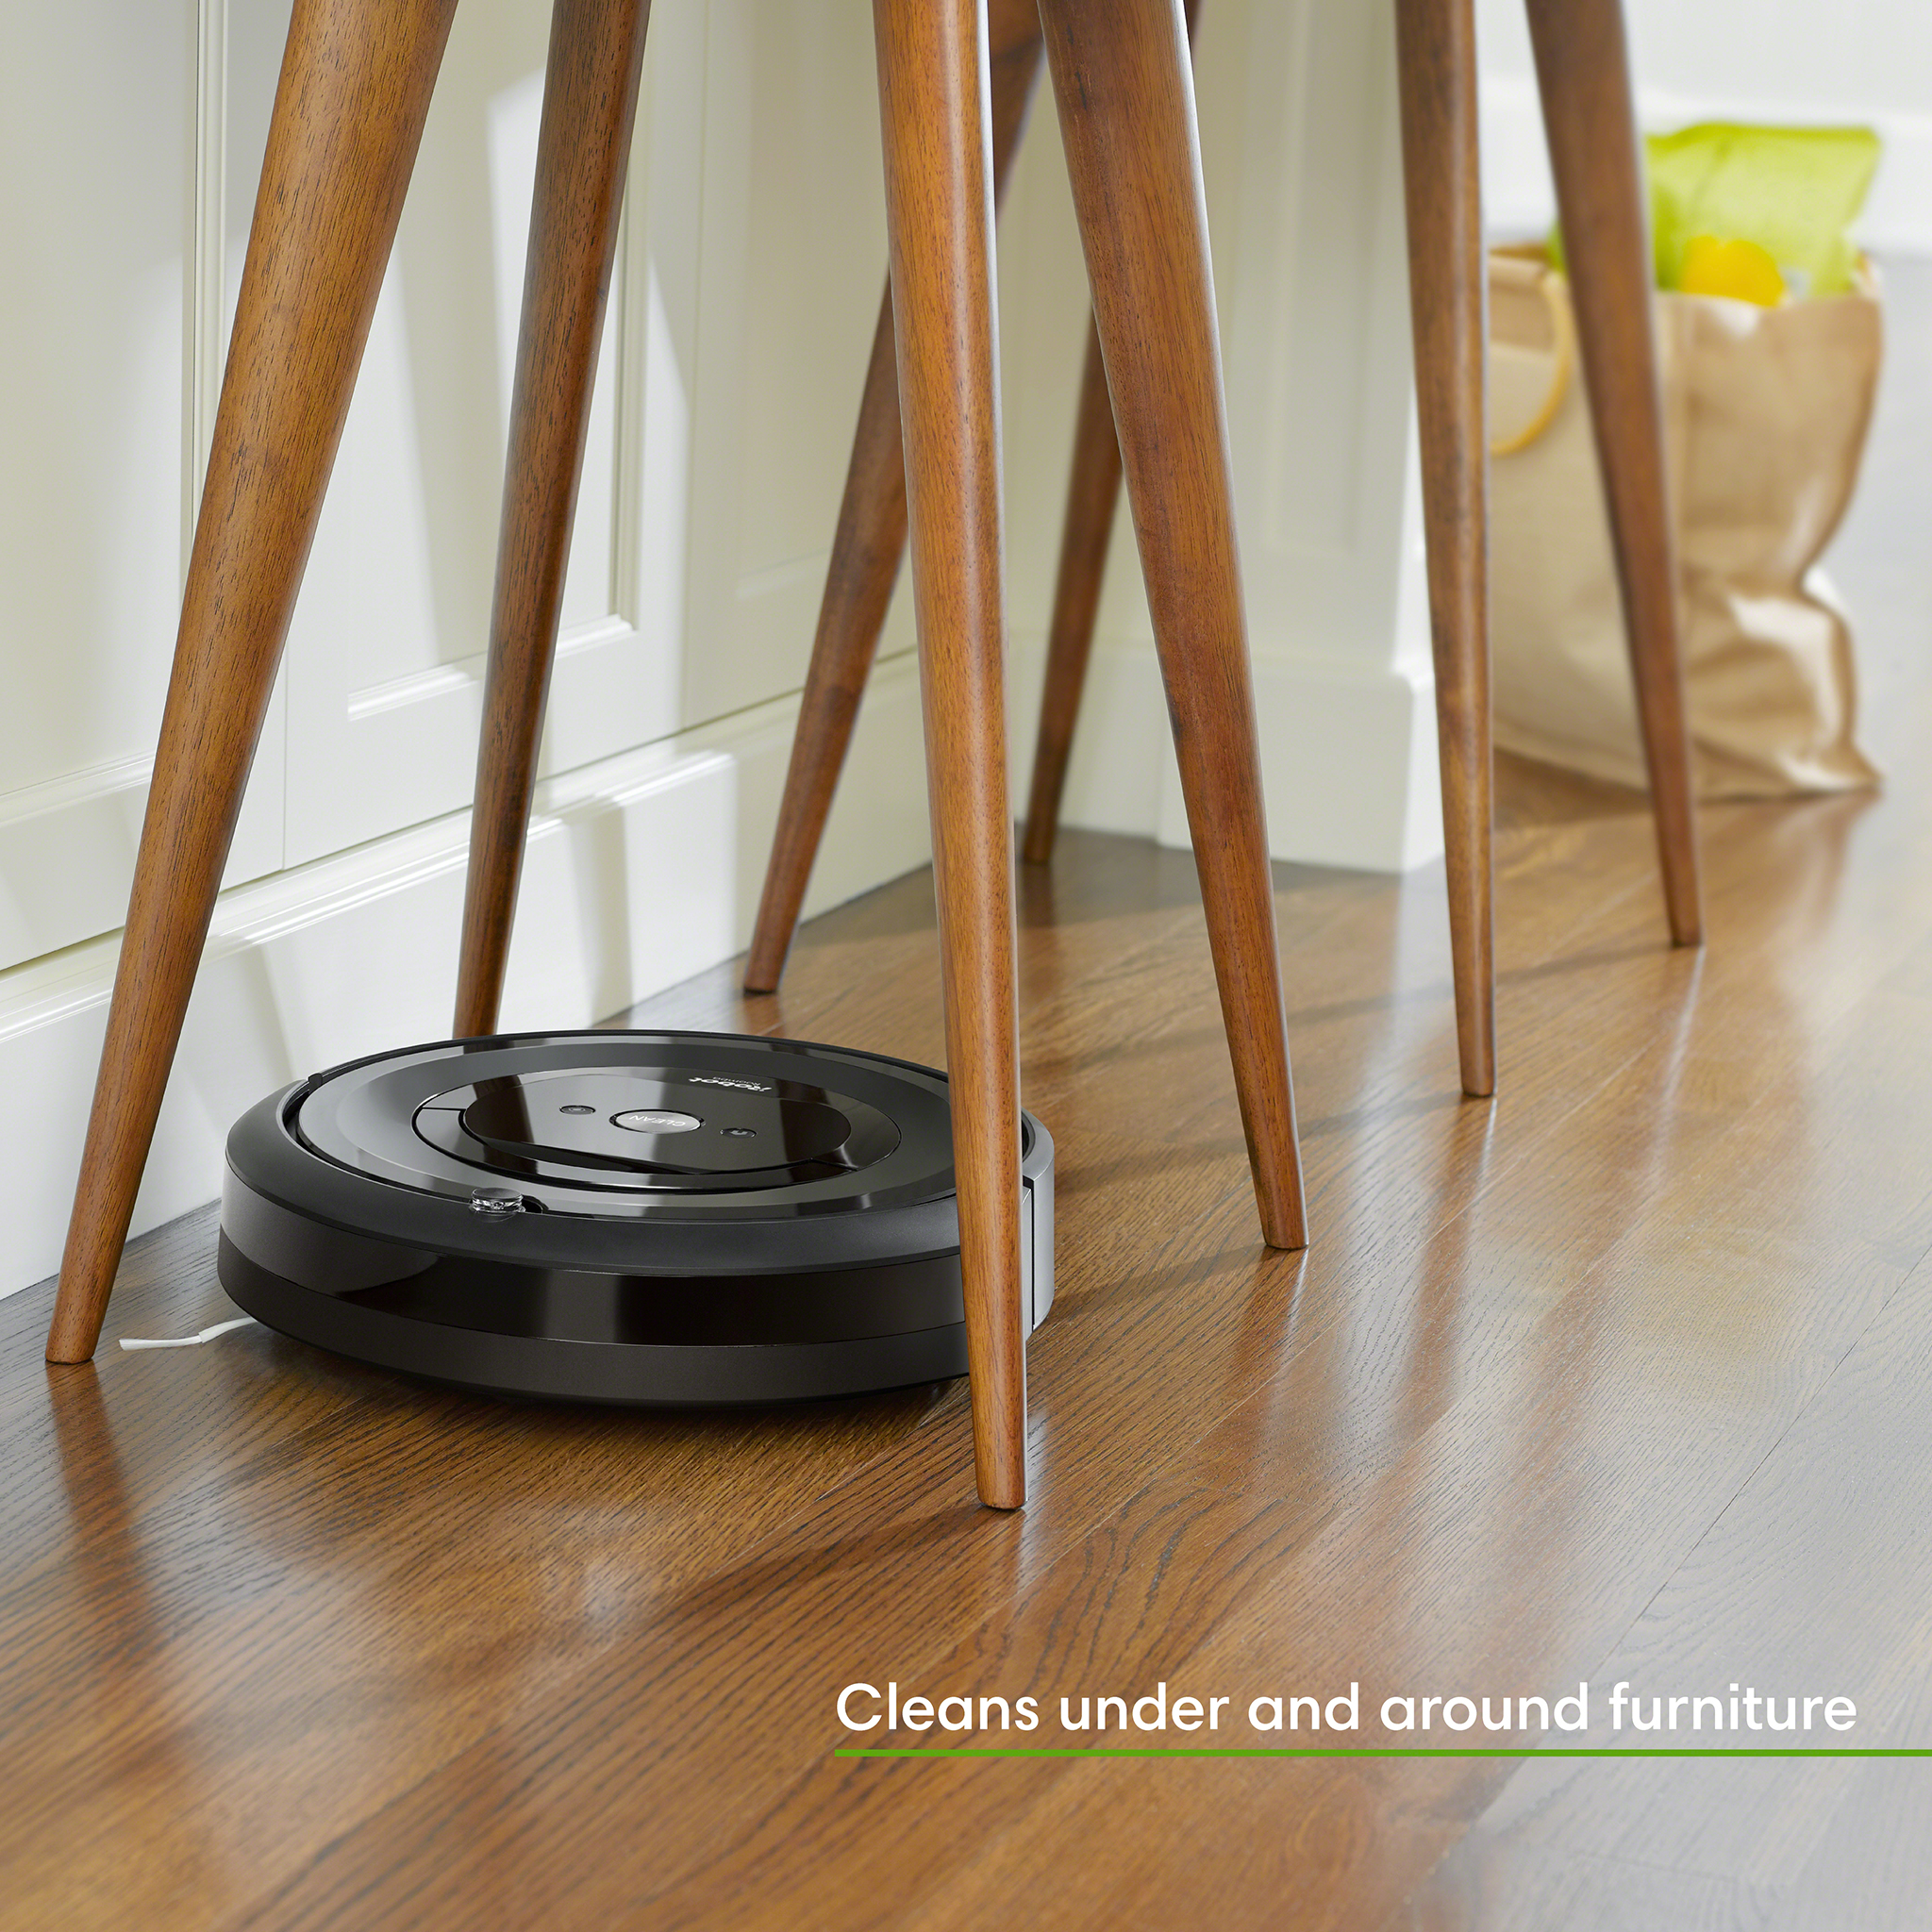 iRobot Roomba e6 (6134) Wi-Fi Connected Robot Vacuum - Wi-Fi Connected, Works with Google, Ideal for Pet Hair, Carpets, Hard, Self-Charging Robotic Vacuum - image 8 of 15